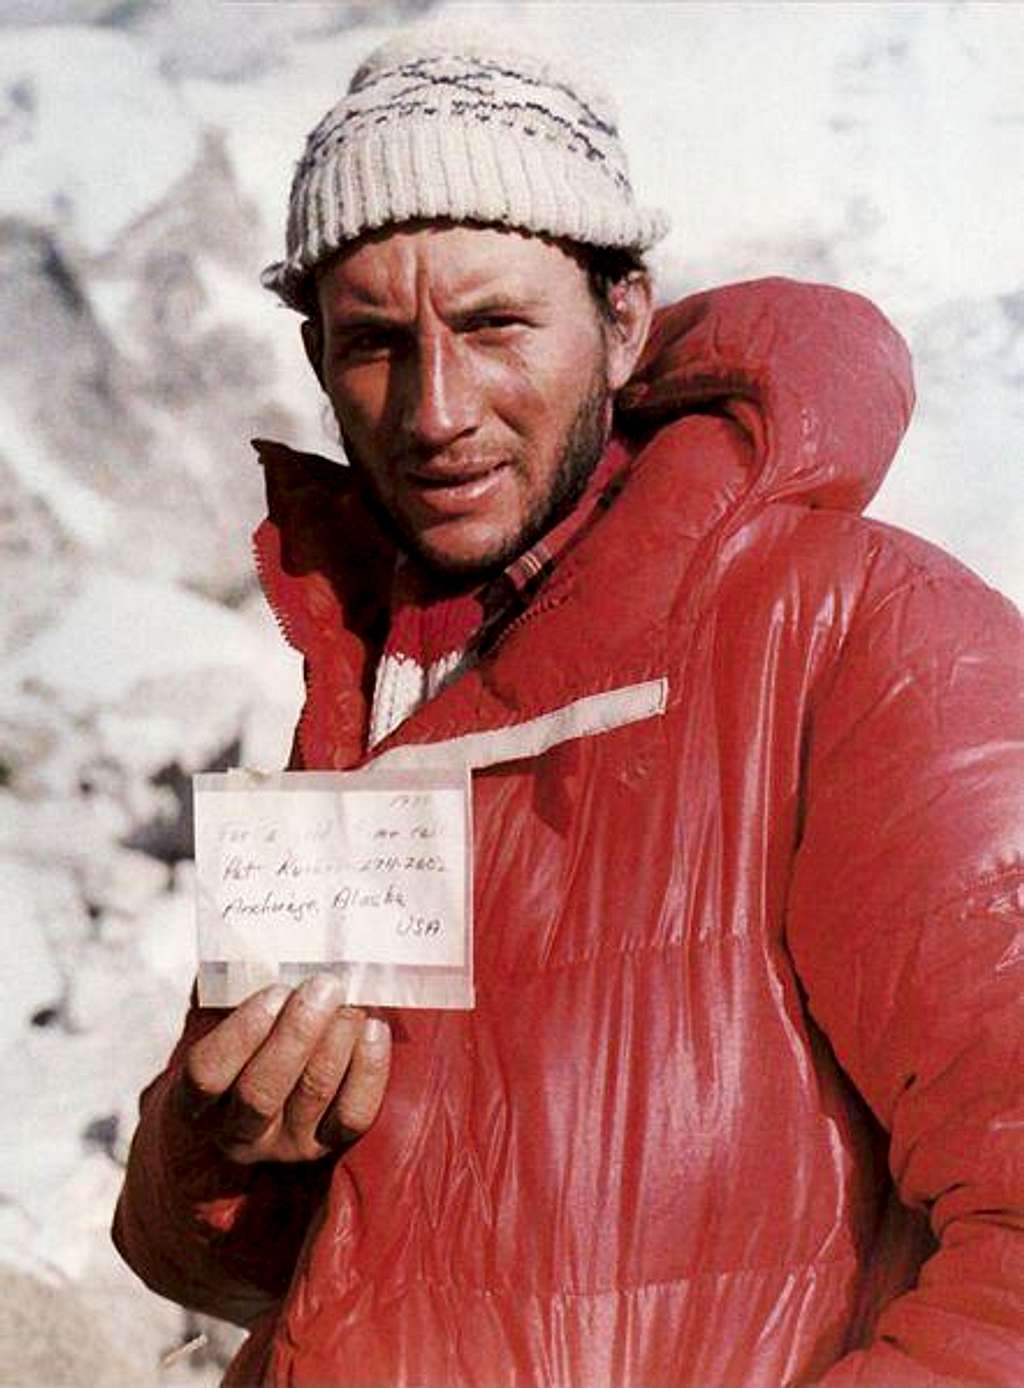 Leszek Cichy presents the note which Ray Genet left on top of Mount Everest in 1979